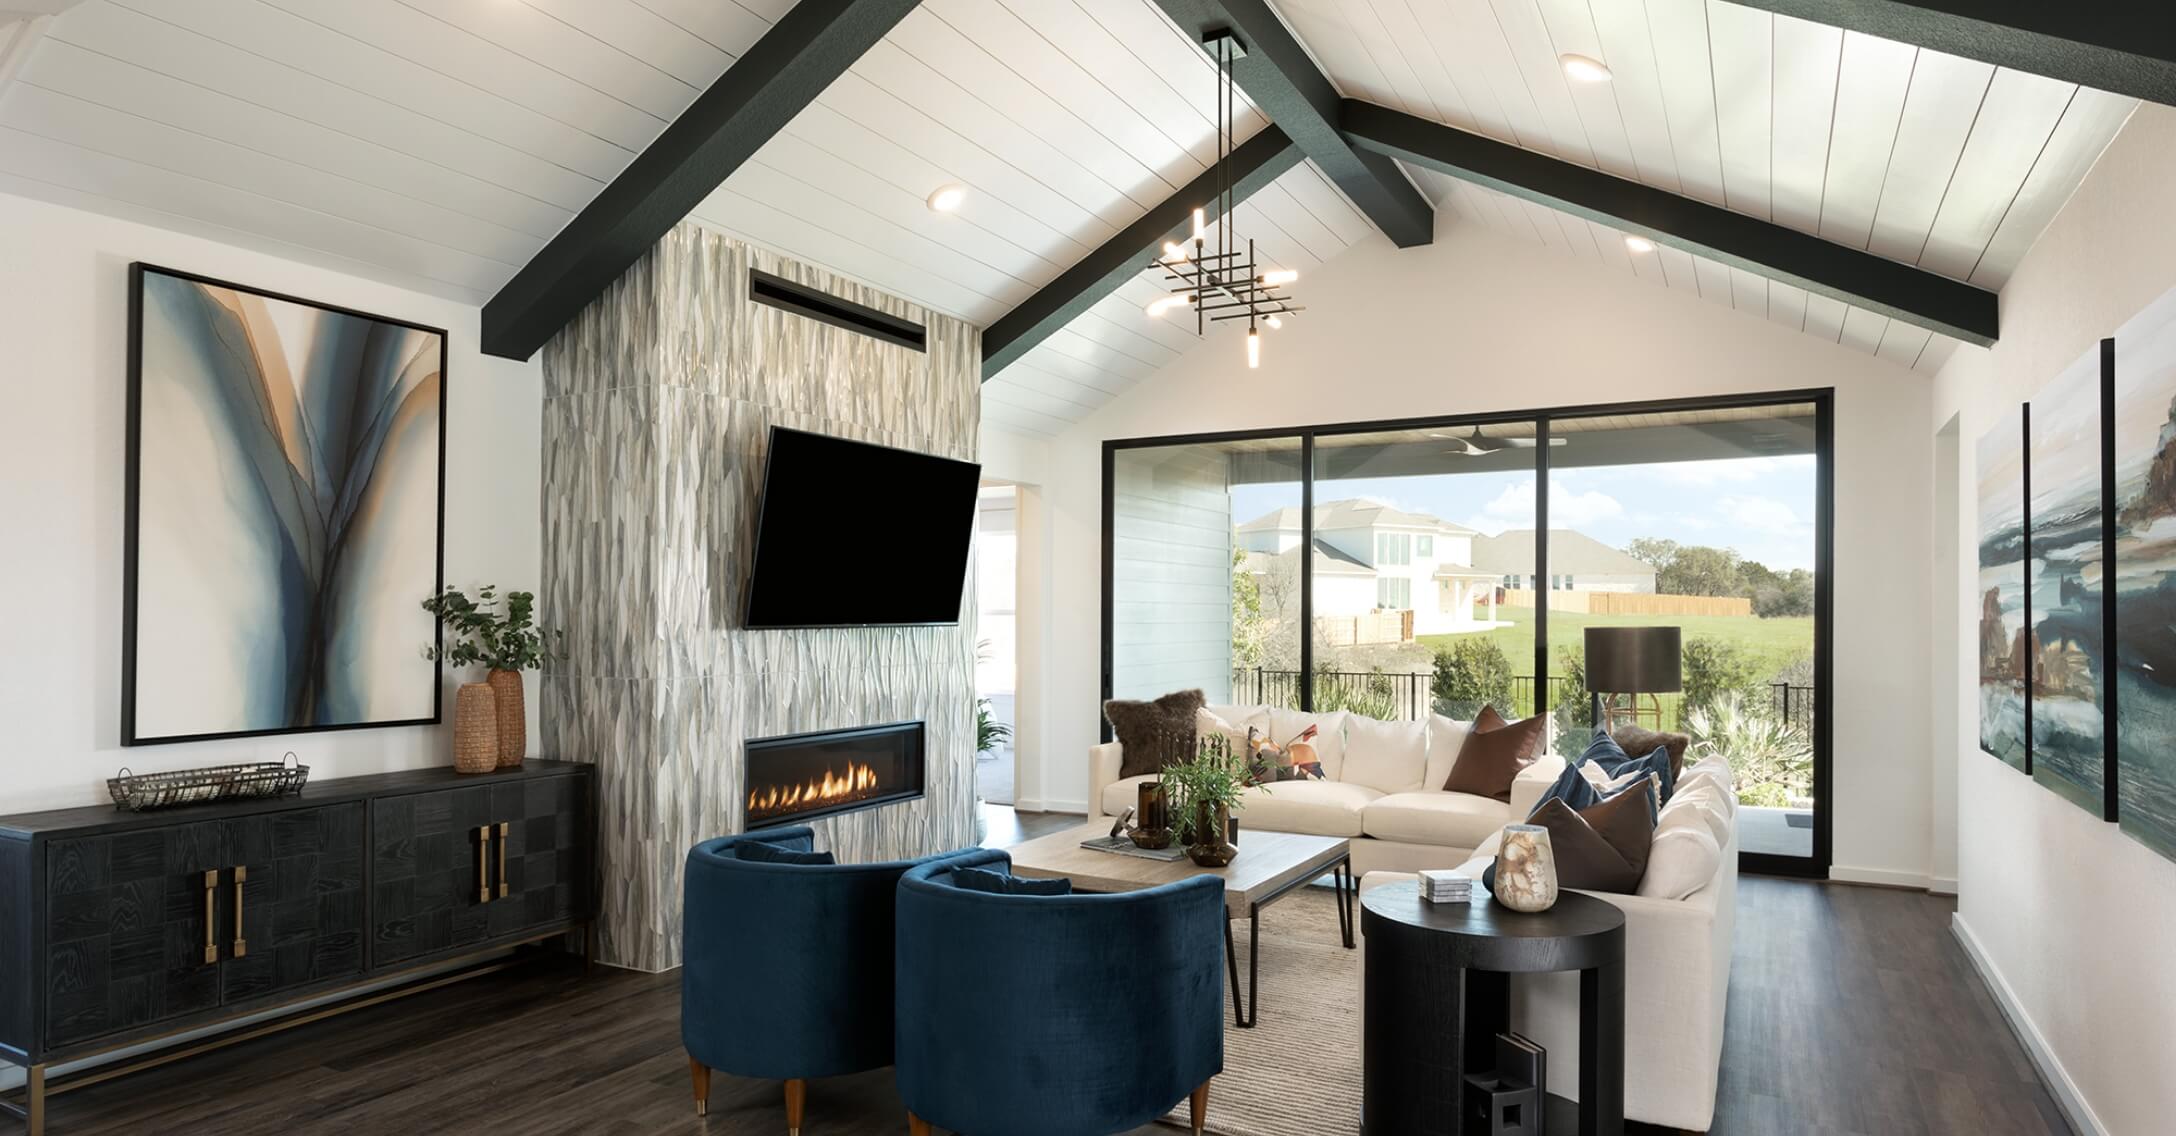 A living room with vaulted ceilings and a fireplace in new homes New Braunfels Texas.